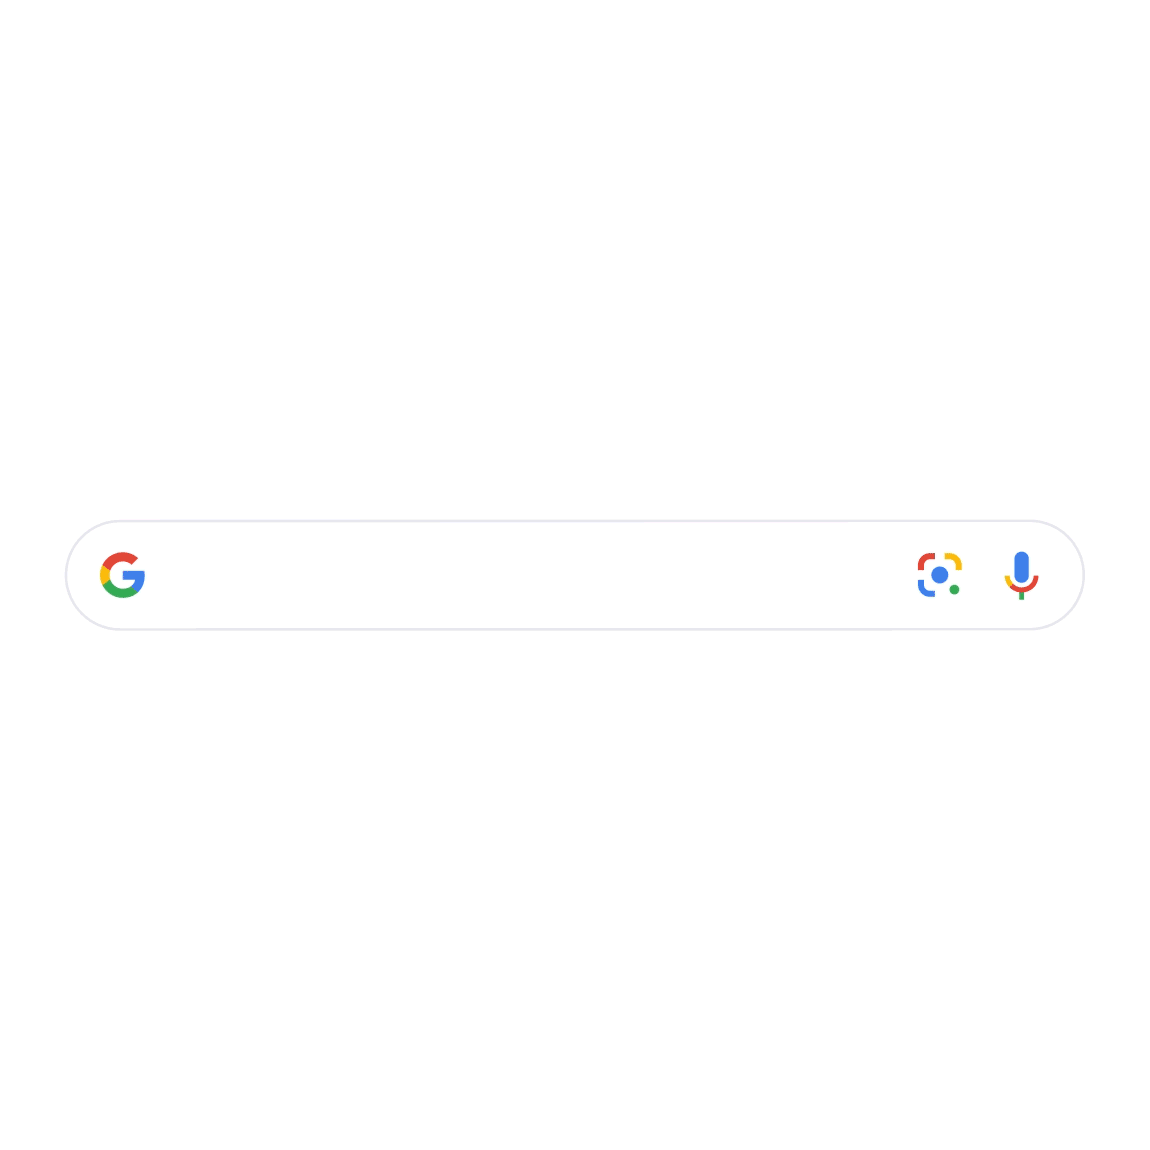 An animation of a misspelled search for "gobbledygook"